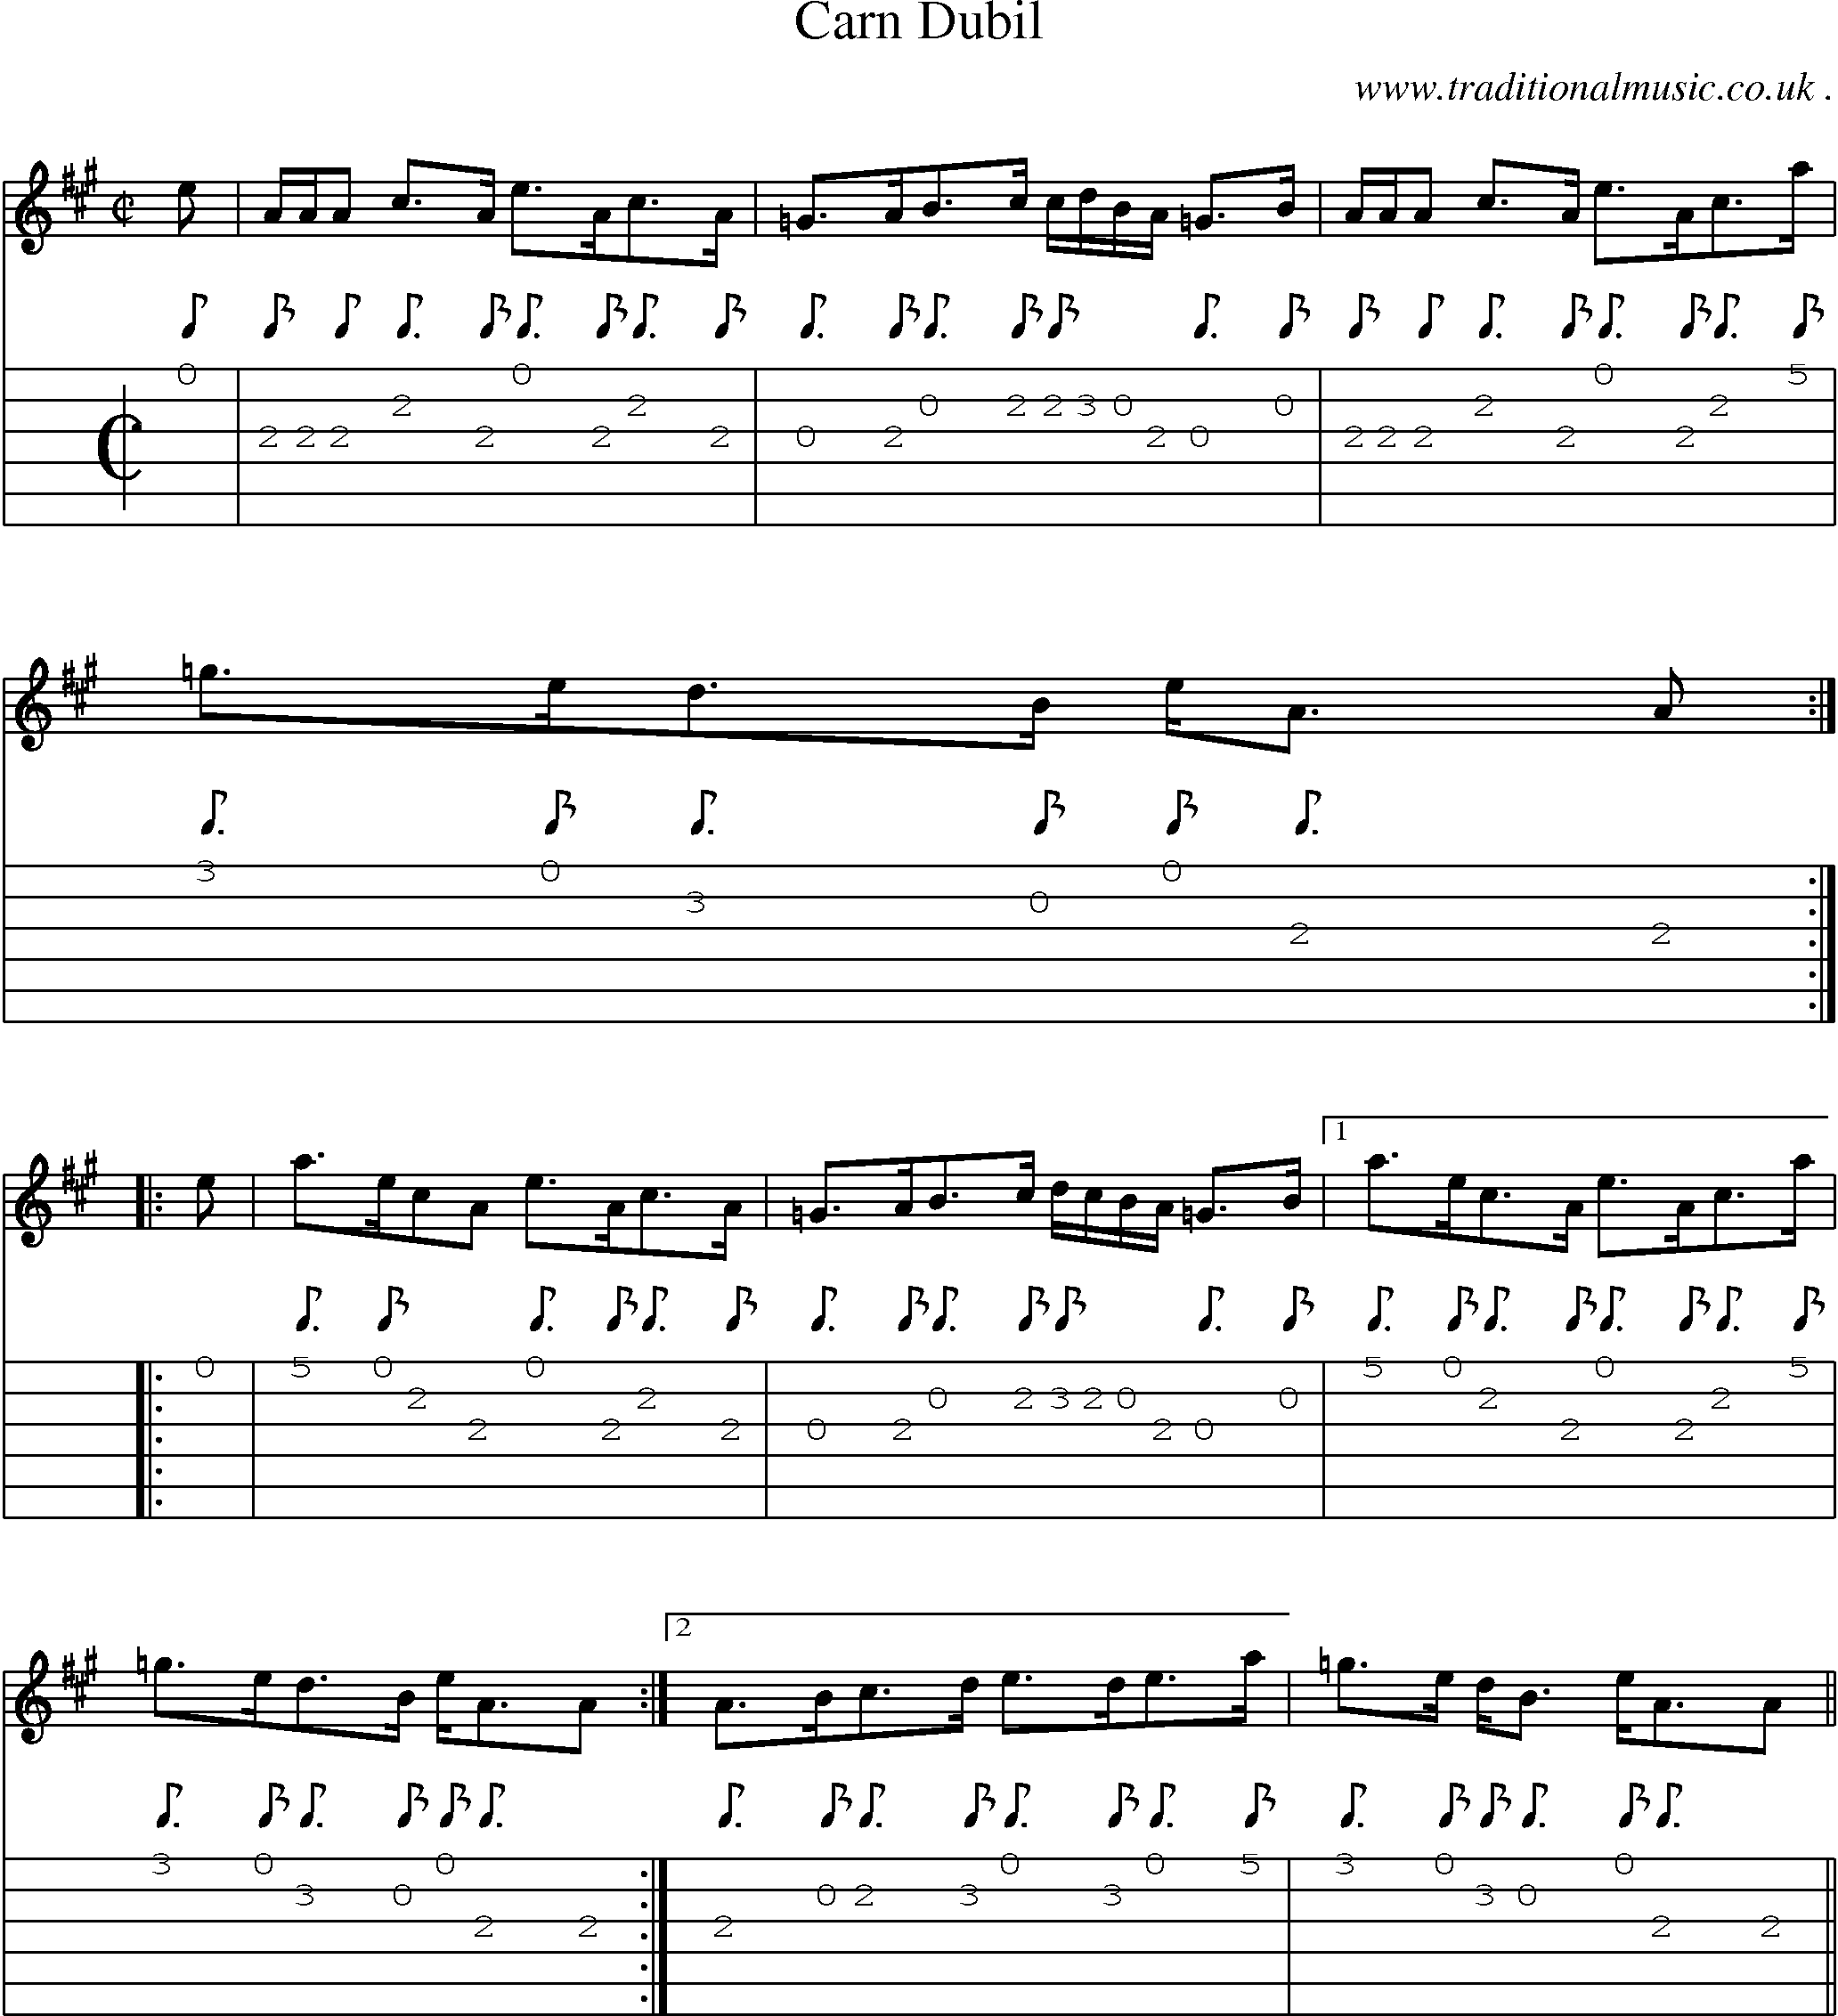 Sheet-music  score, Chords and Guitar Tabs for Carn Dubil